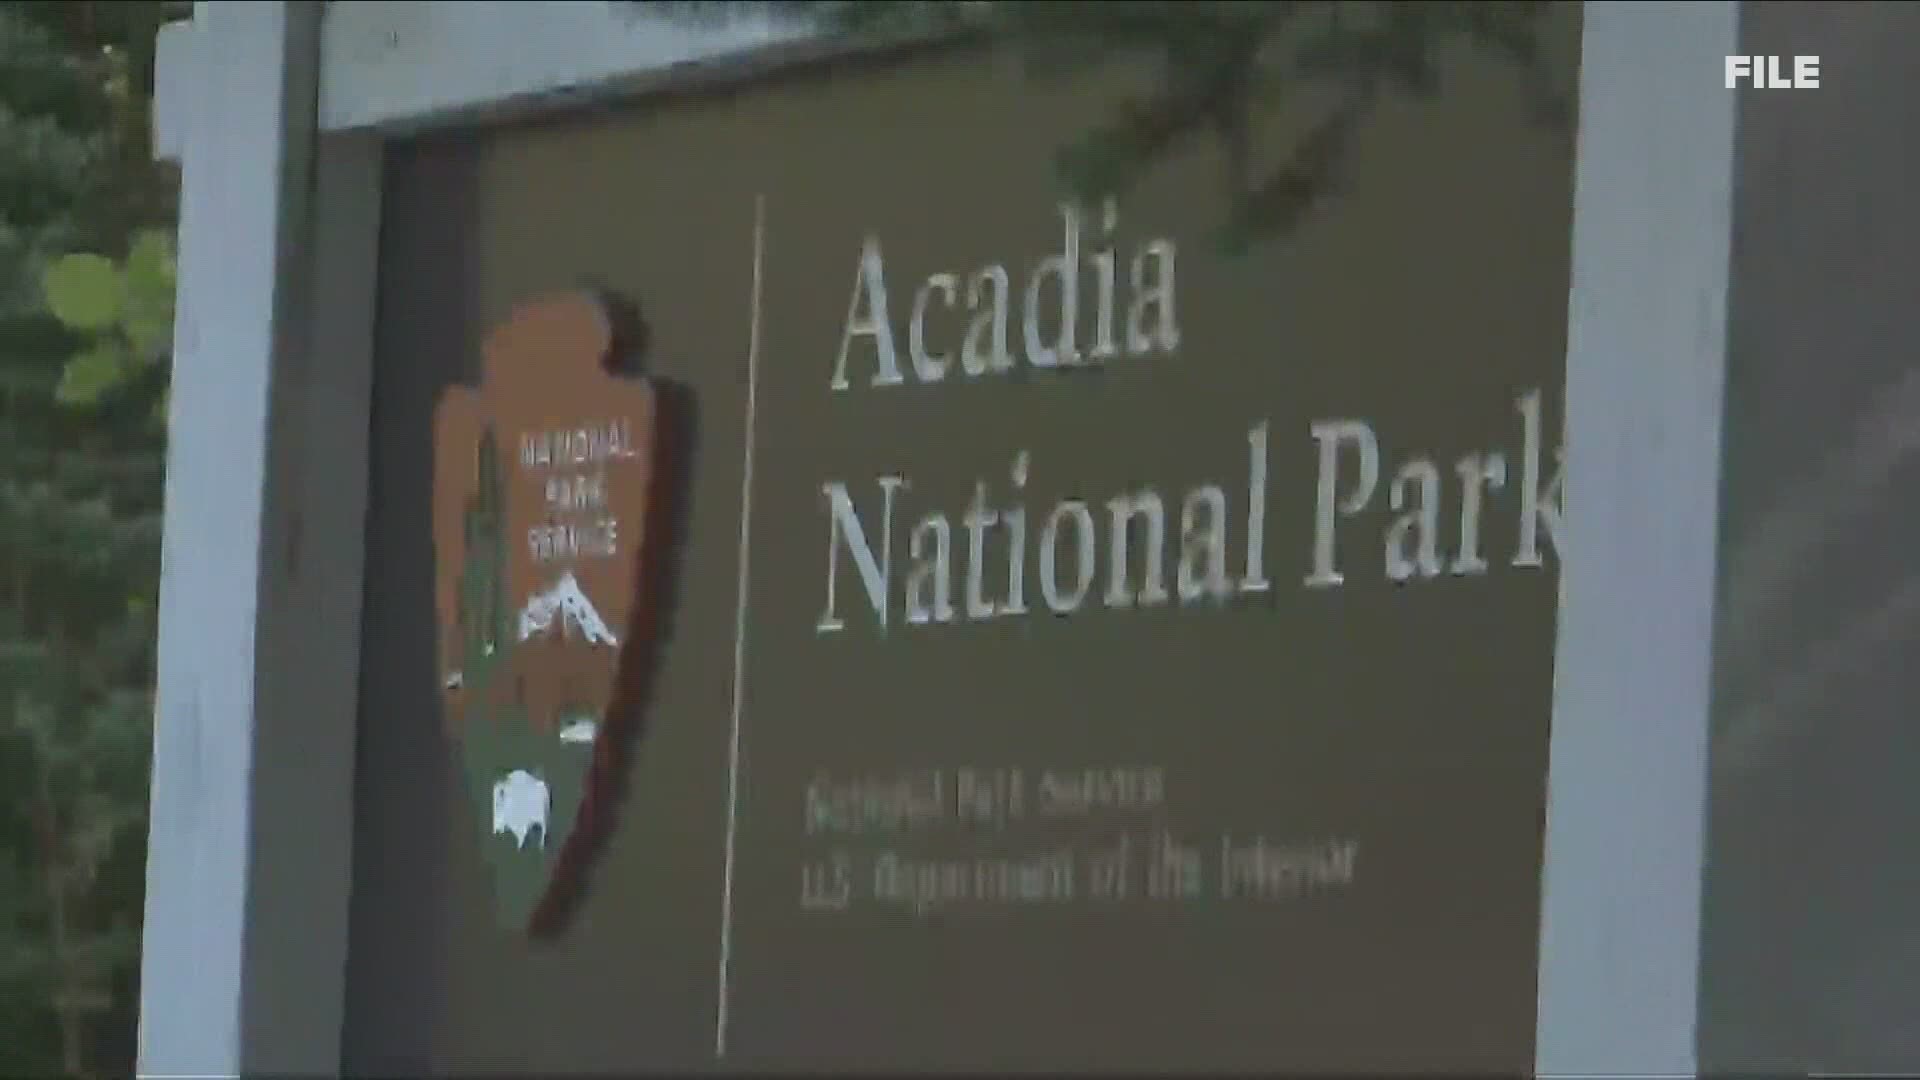 Three scientists will conduct research at Acadia National Park thanks to fellowships from the National Park Service.